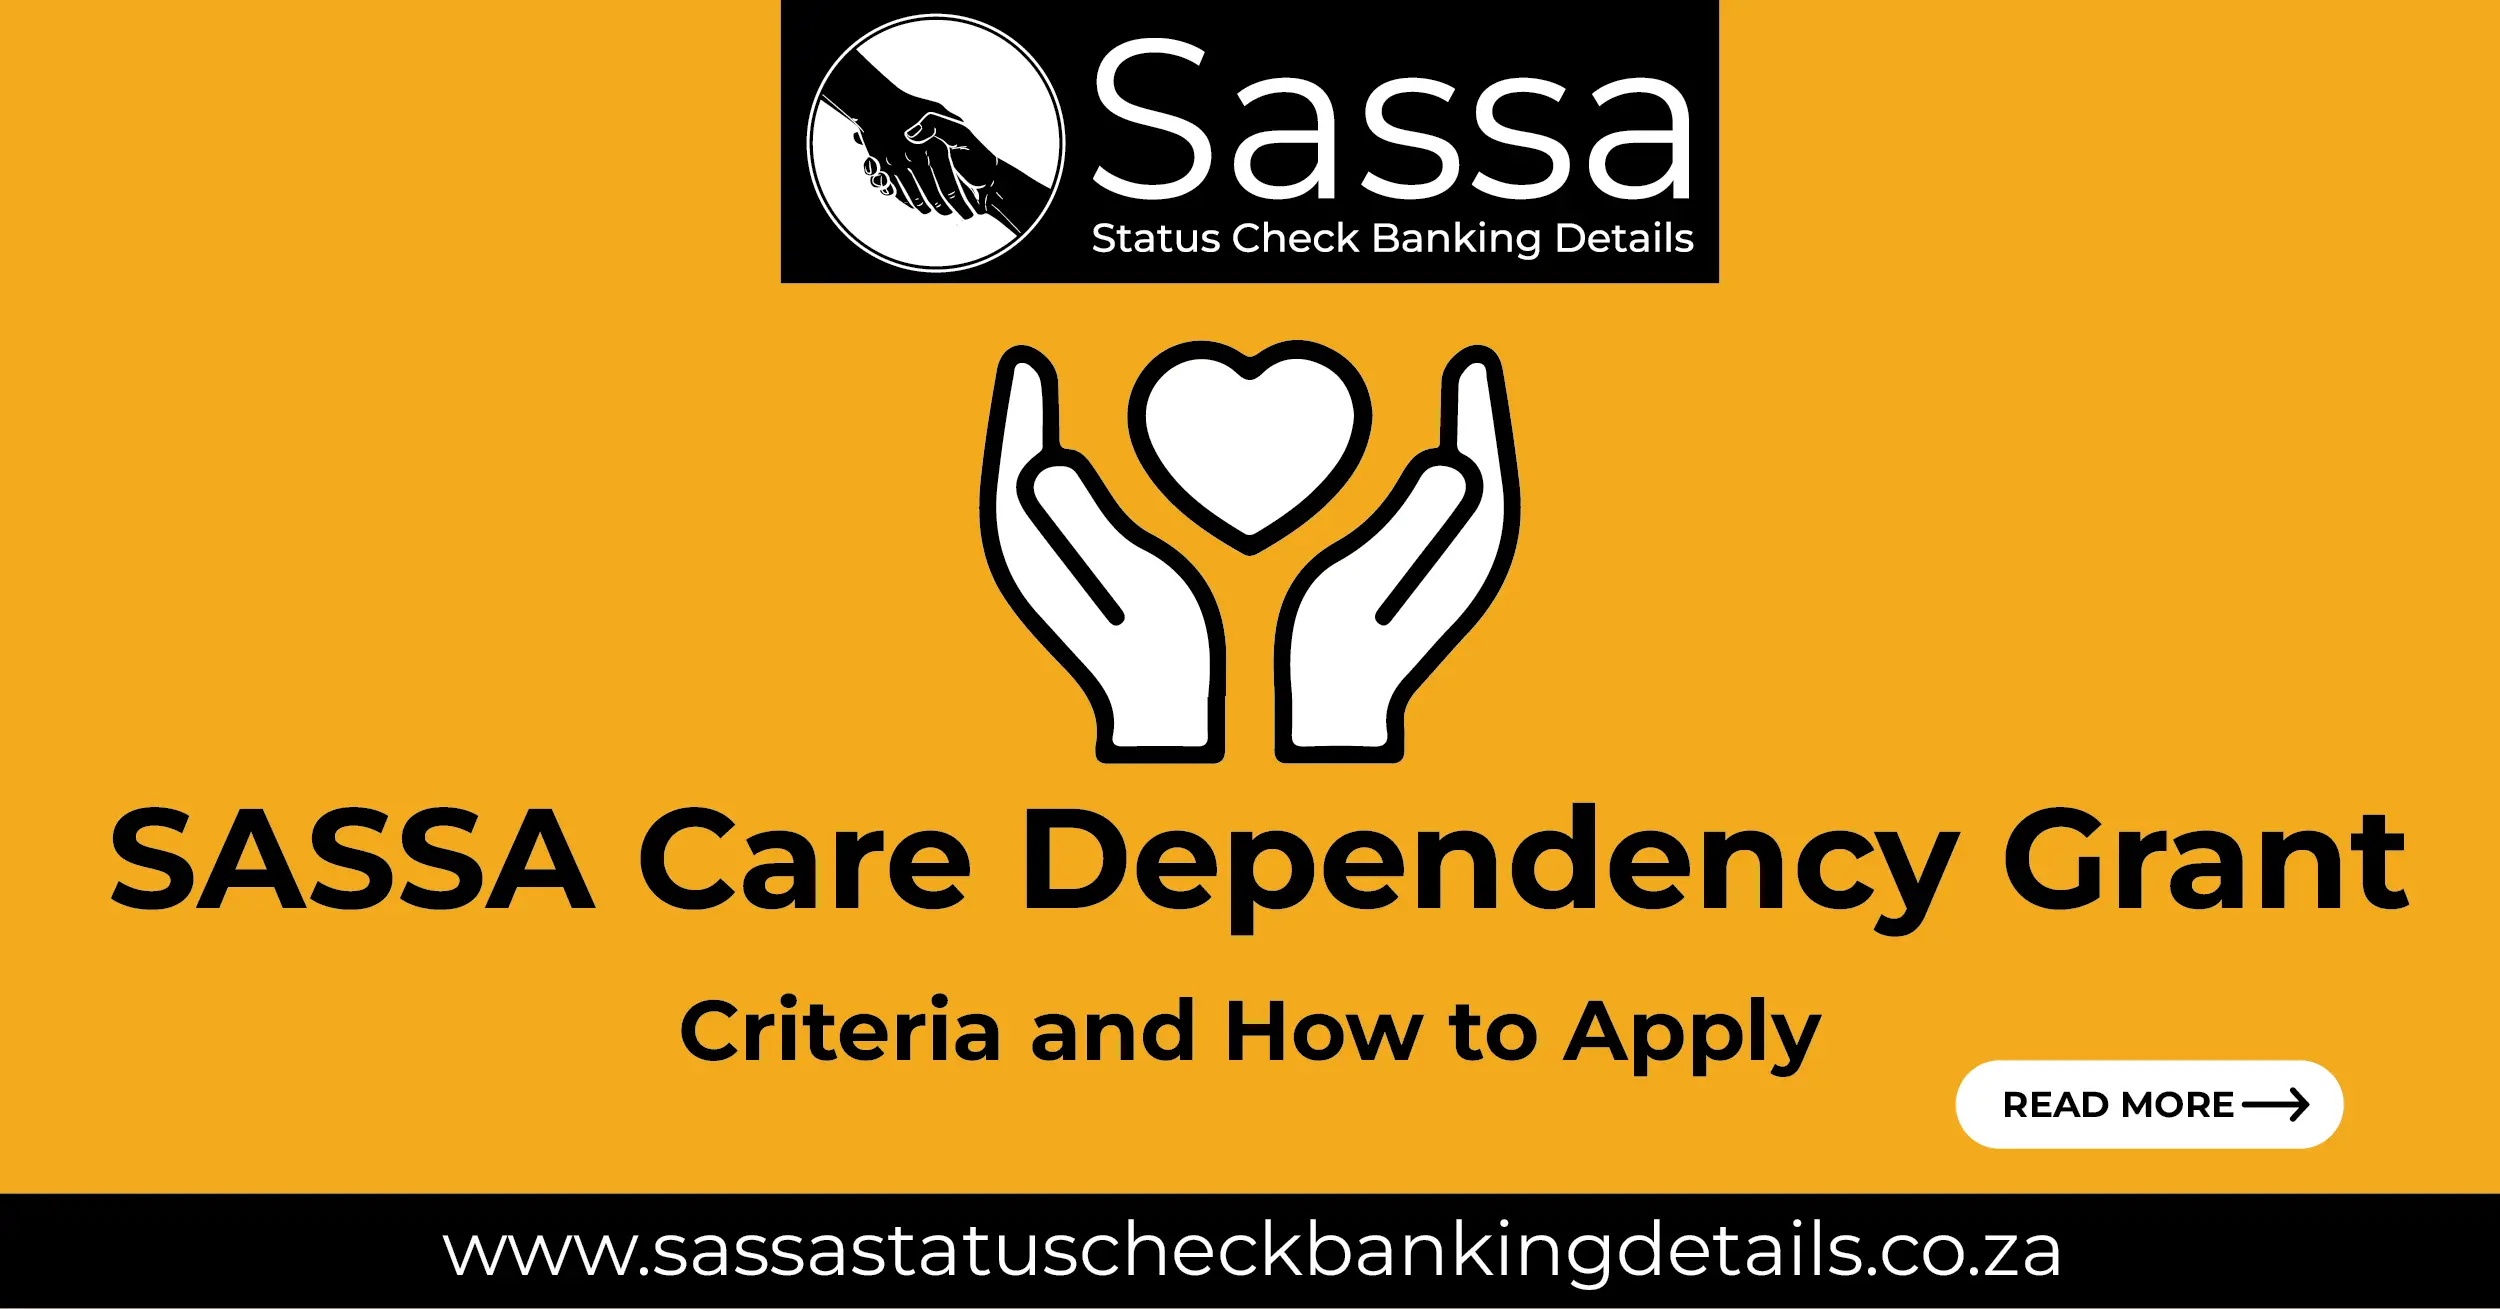 SASSA Care Dependency Grant: Criteria and How to Apply